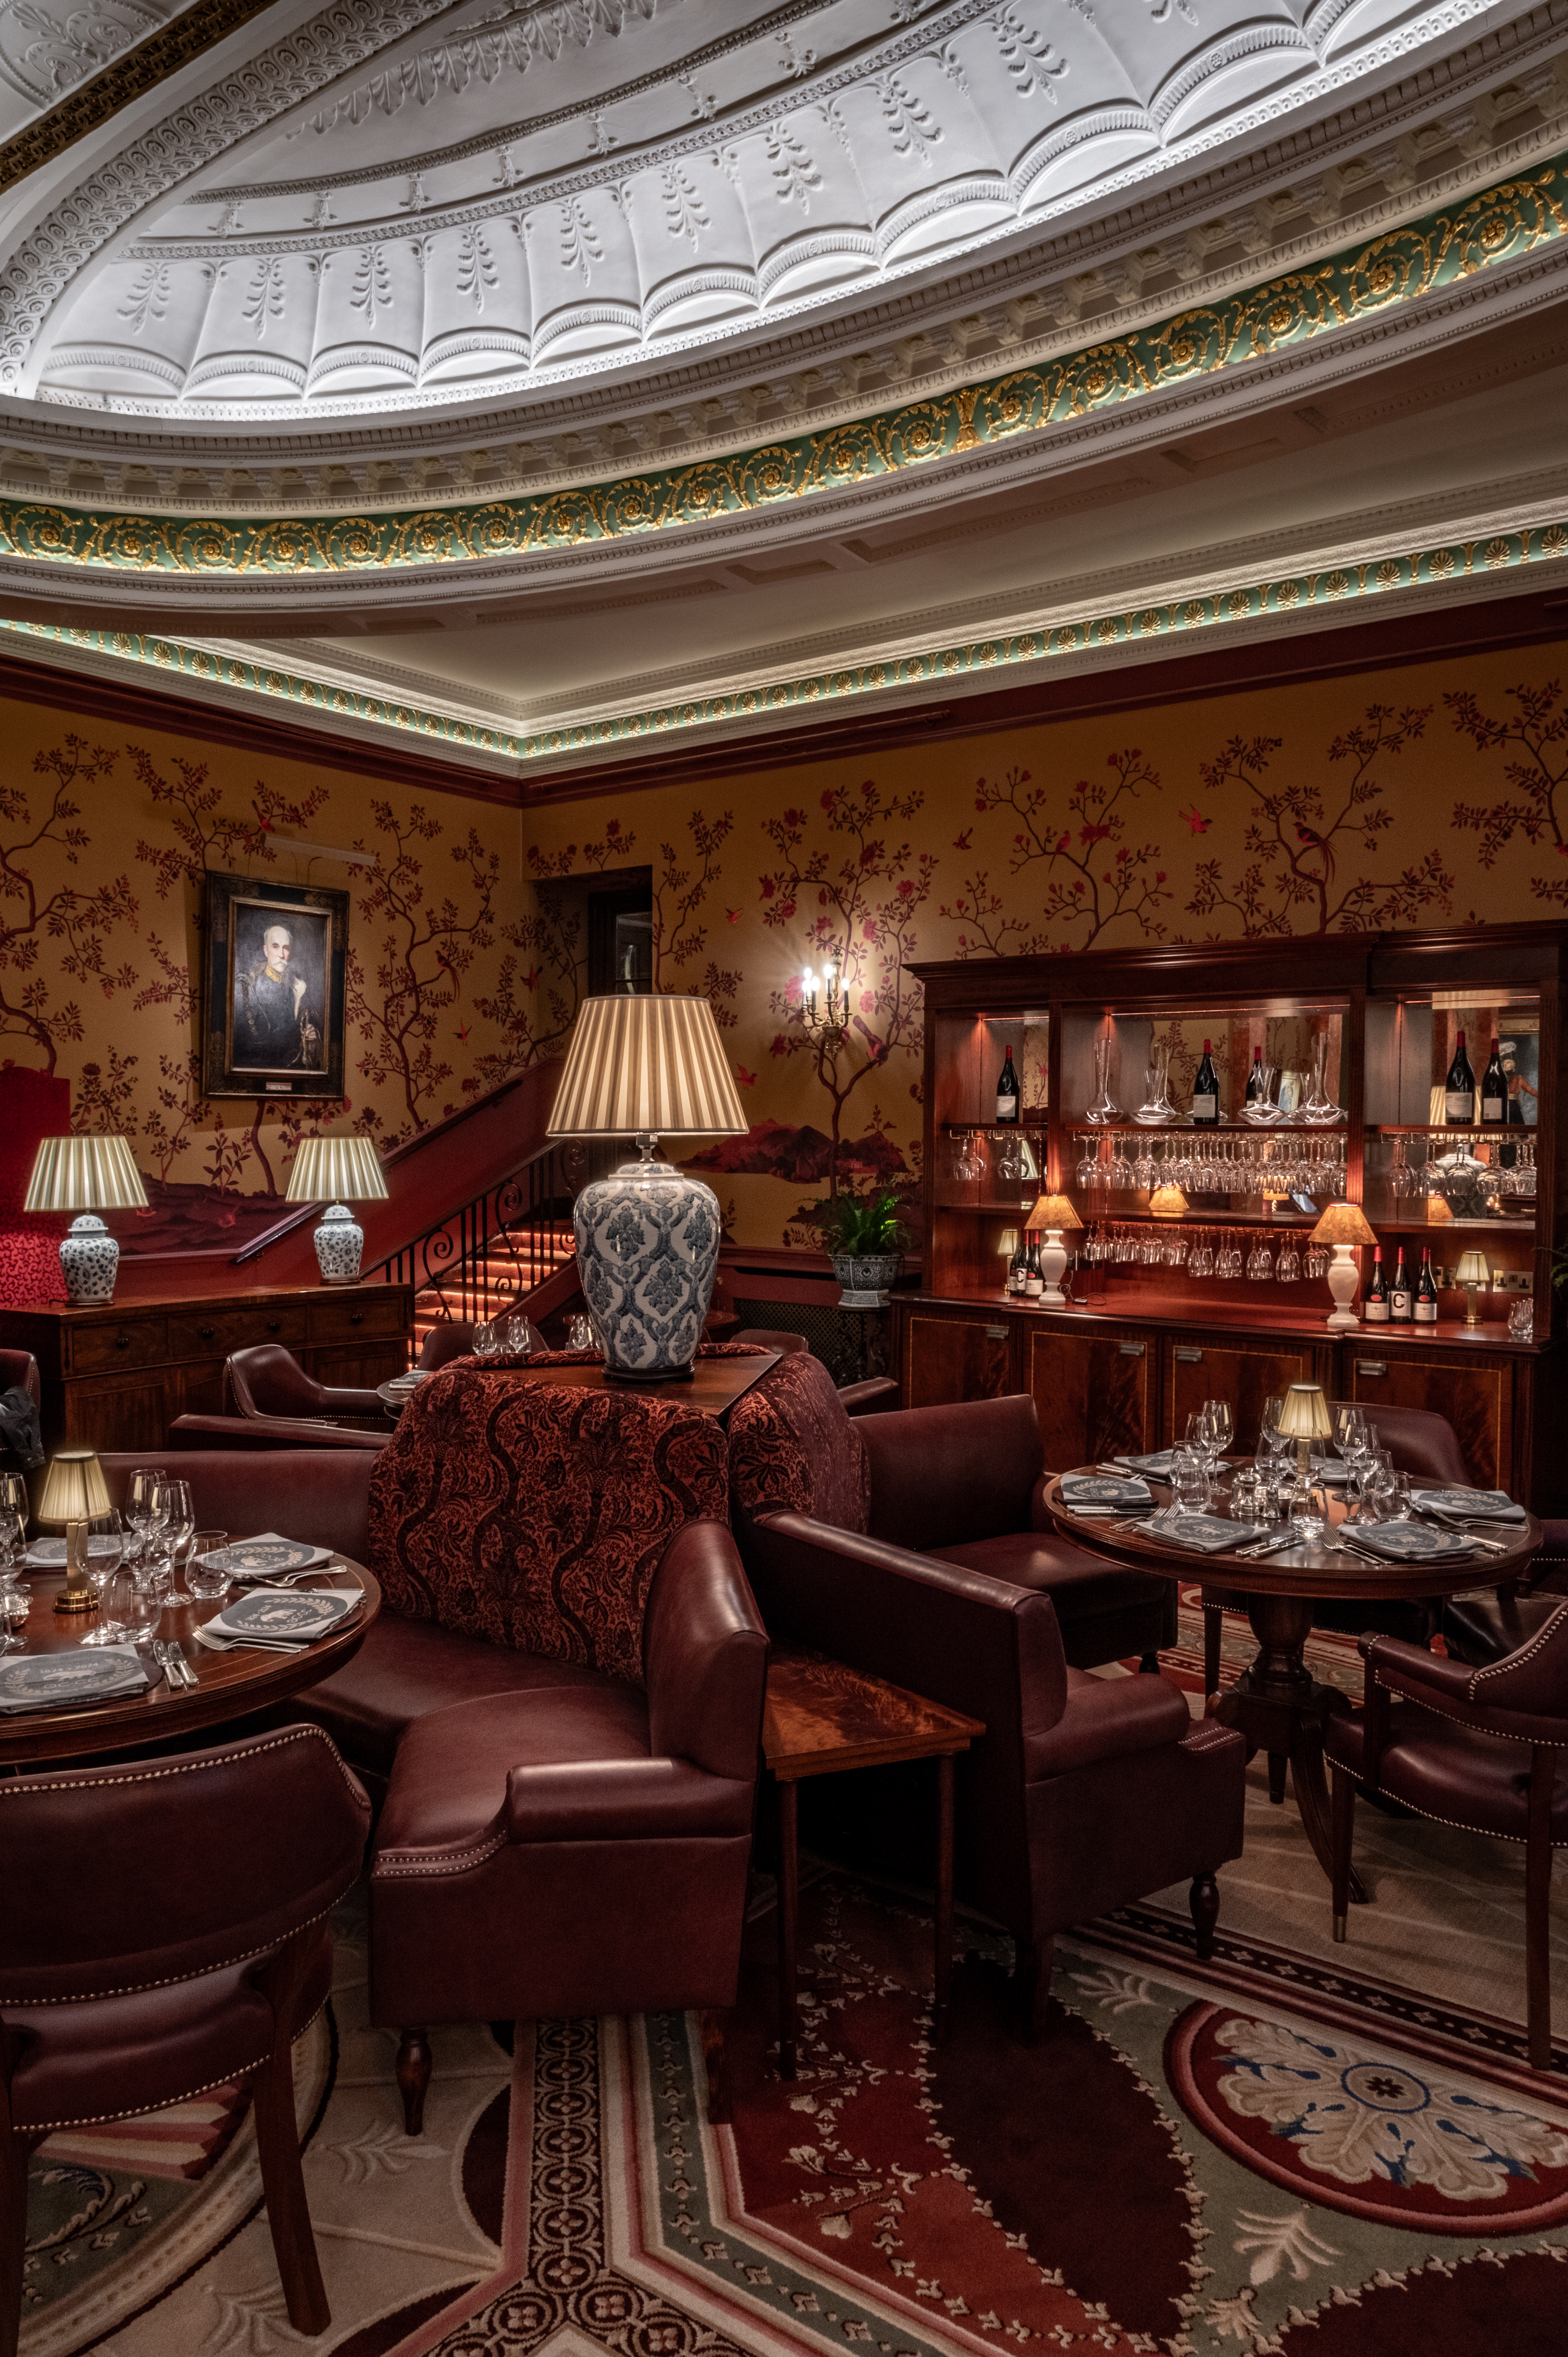 Oriental Club 200 Year Legacy - The new Dining Room has been designed to celebrate British craft and aesthetics from the East